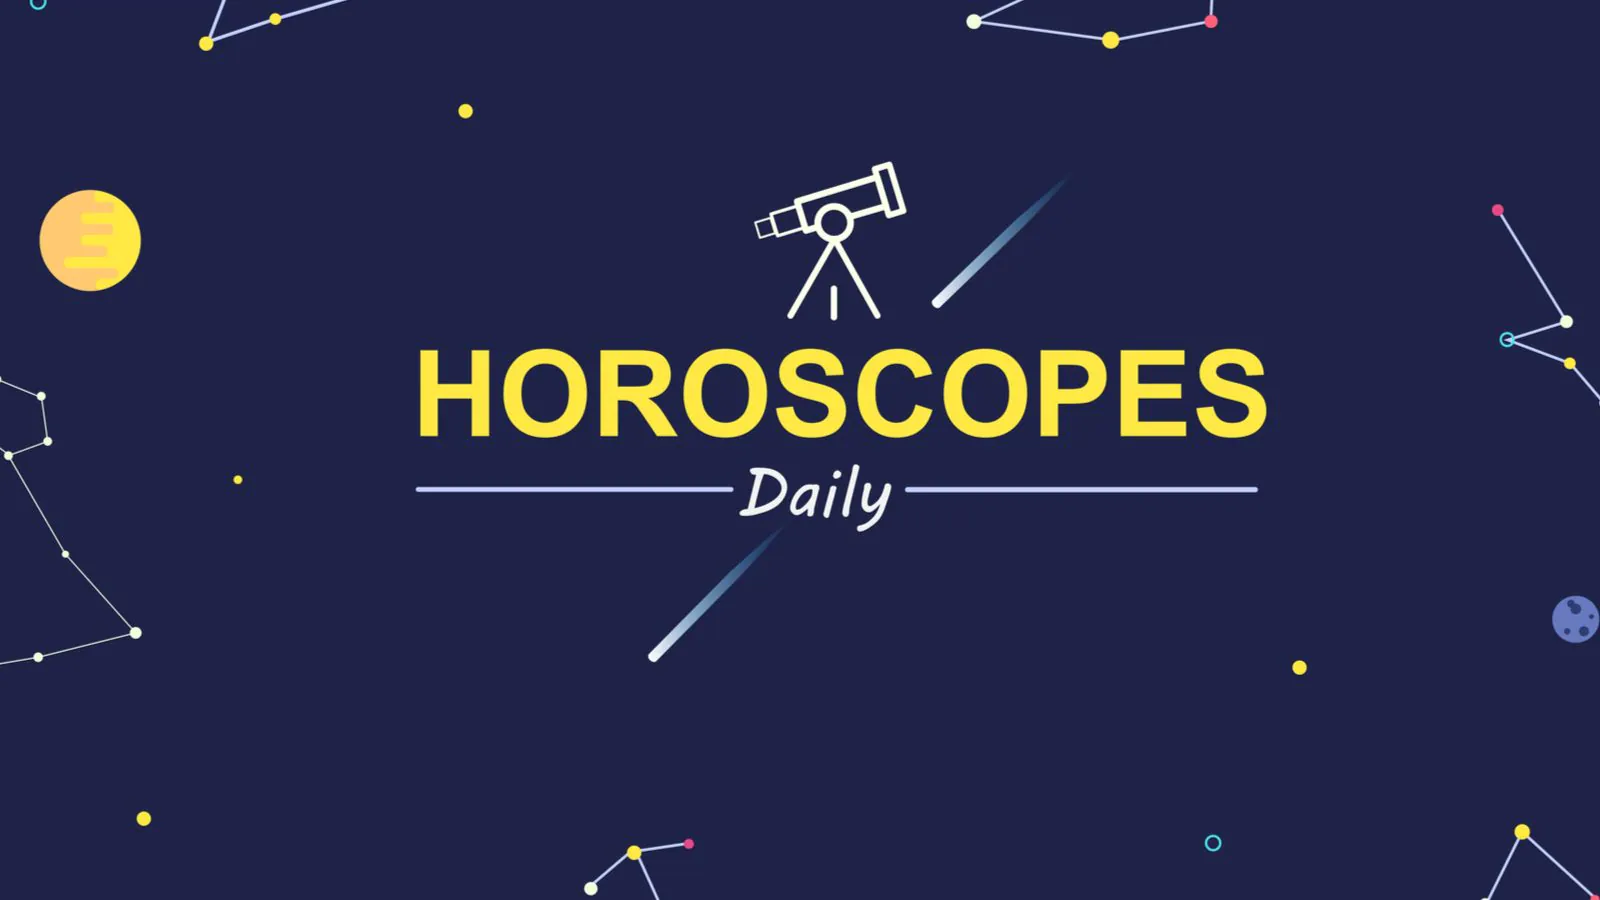 Check Out Daily Astrological Prediction for Aries, Taurus, Libra, Sagittarius, And Other Zodiac Signs for Tuesday